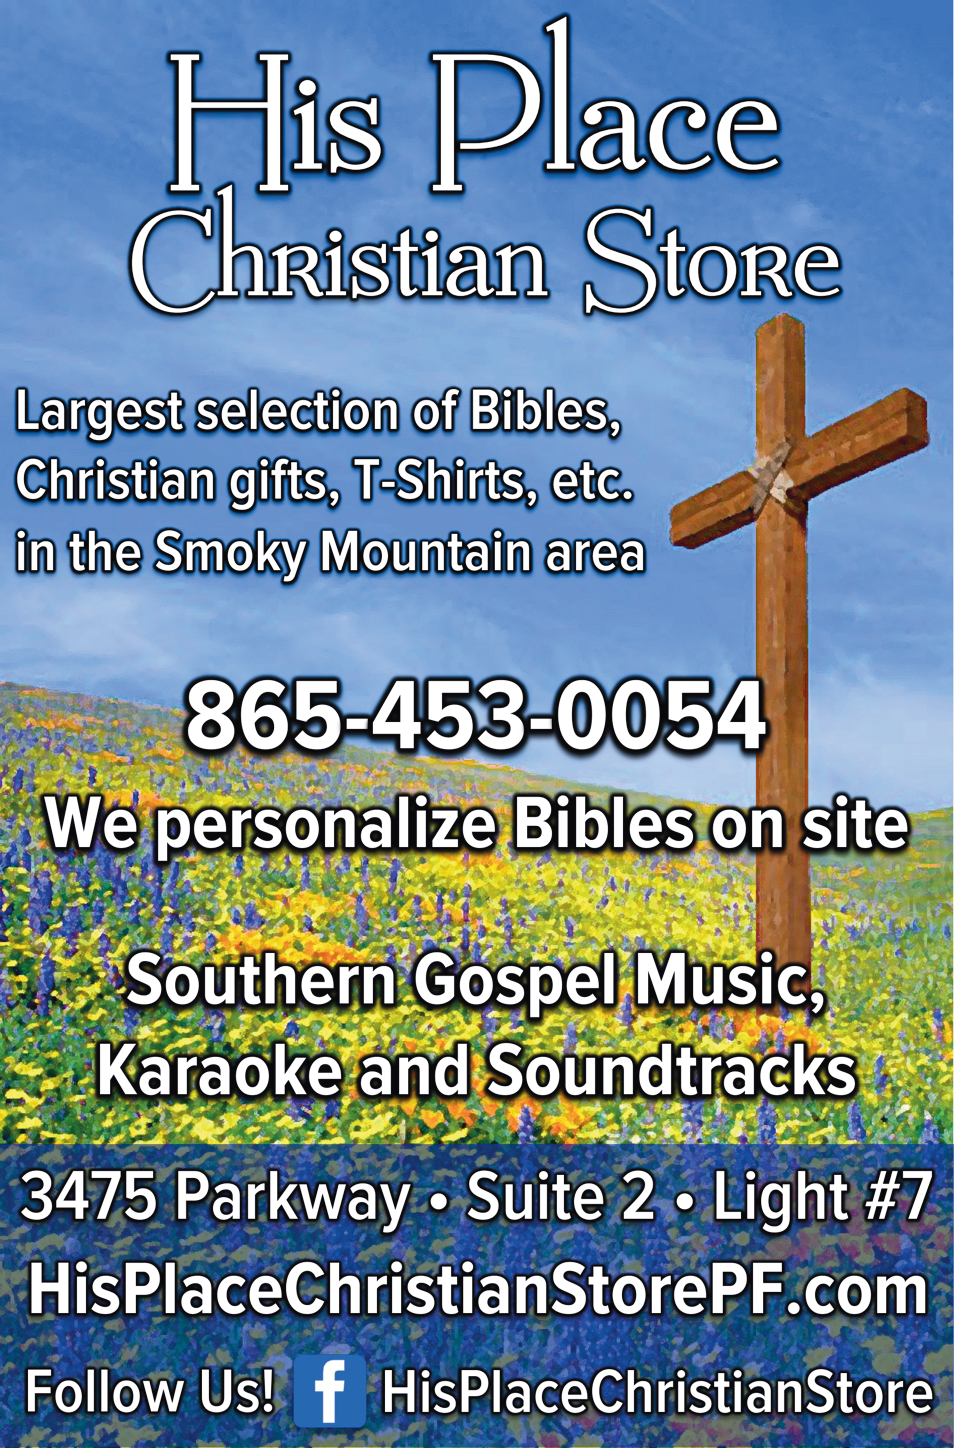 His Place Christian Store Print Ad